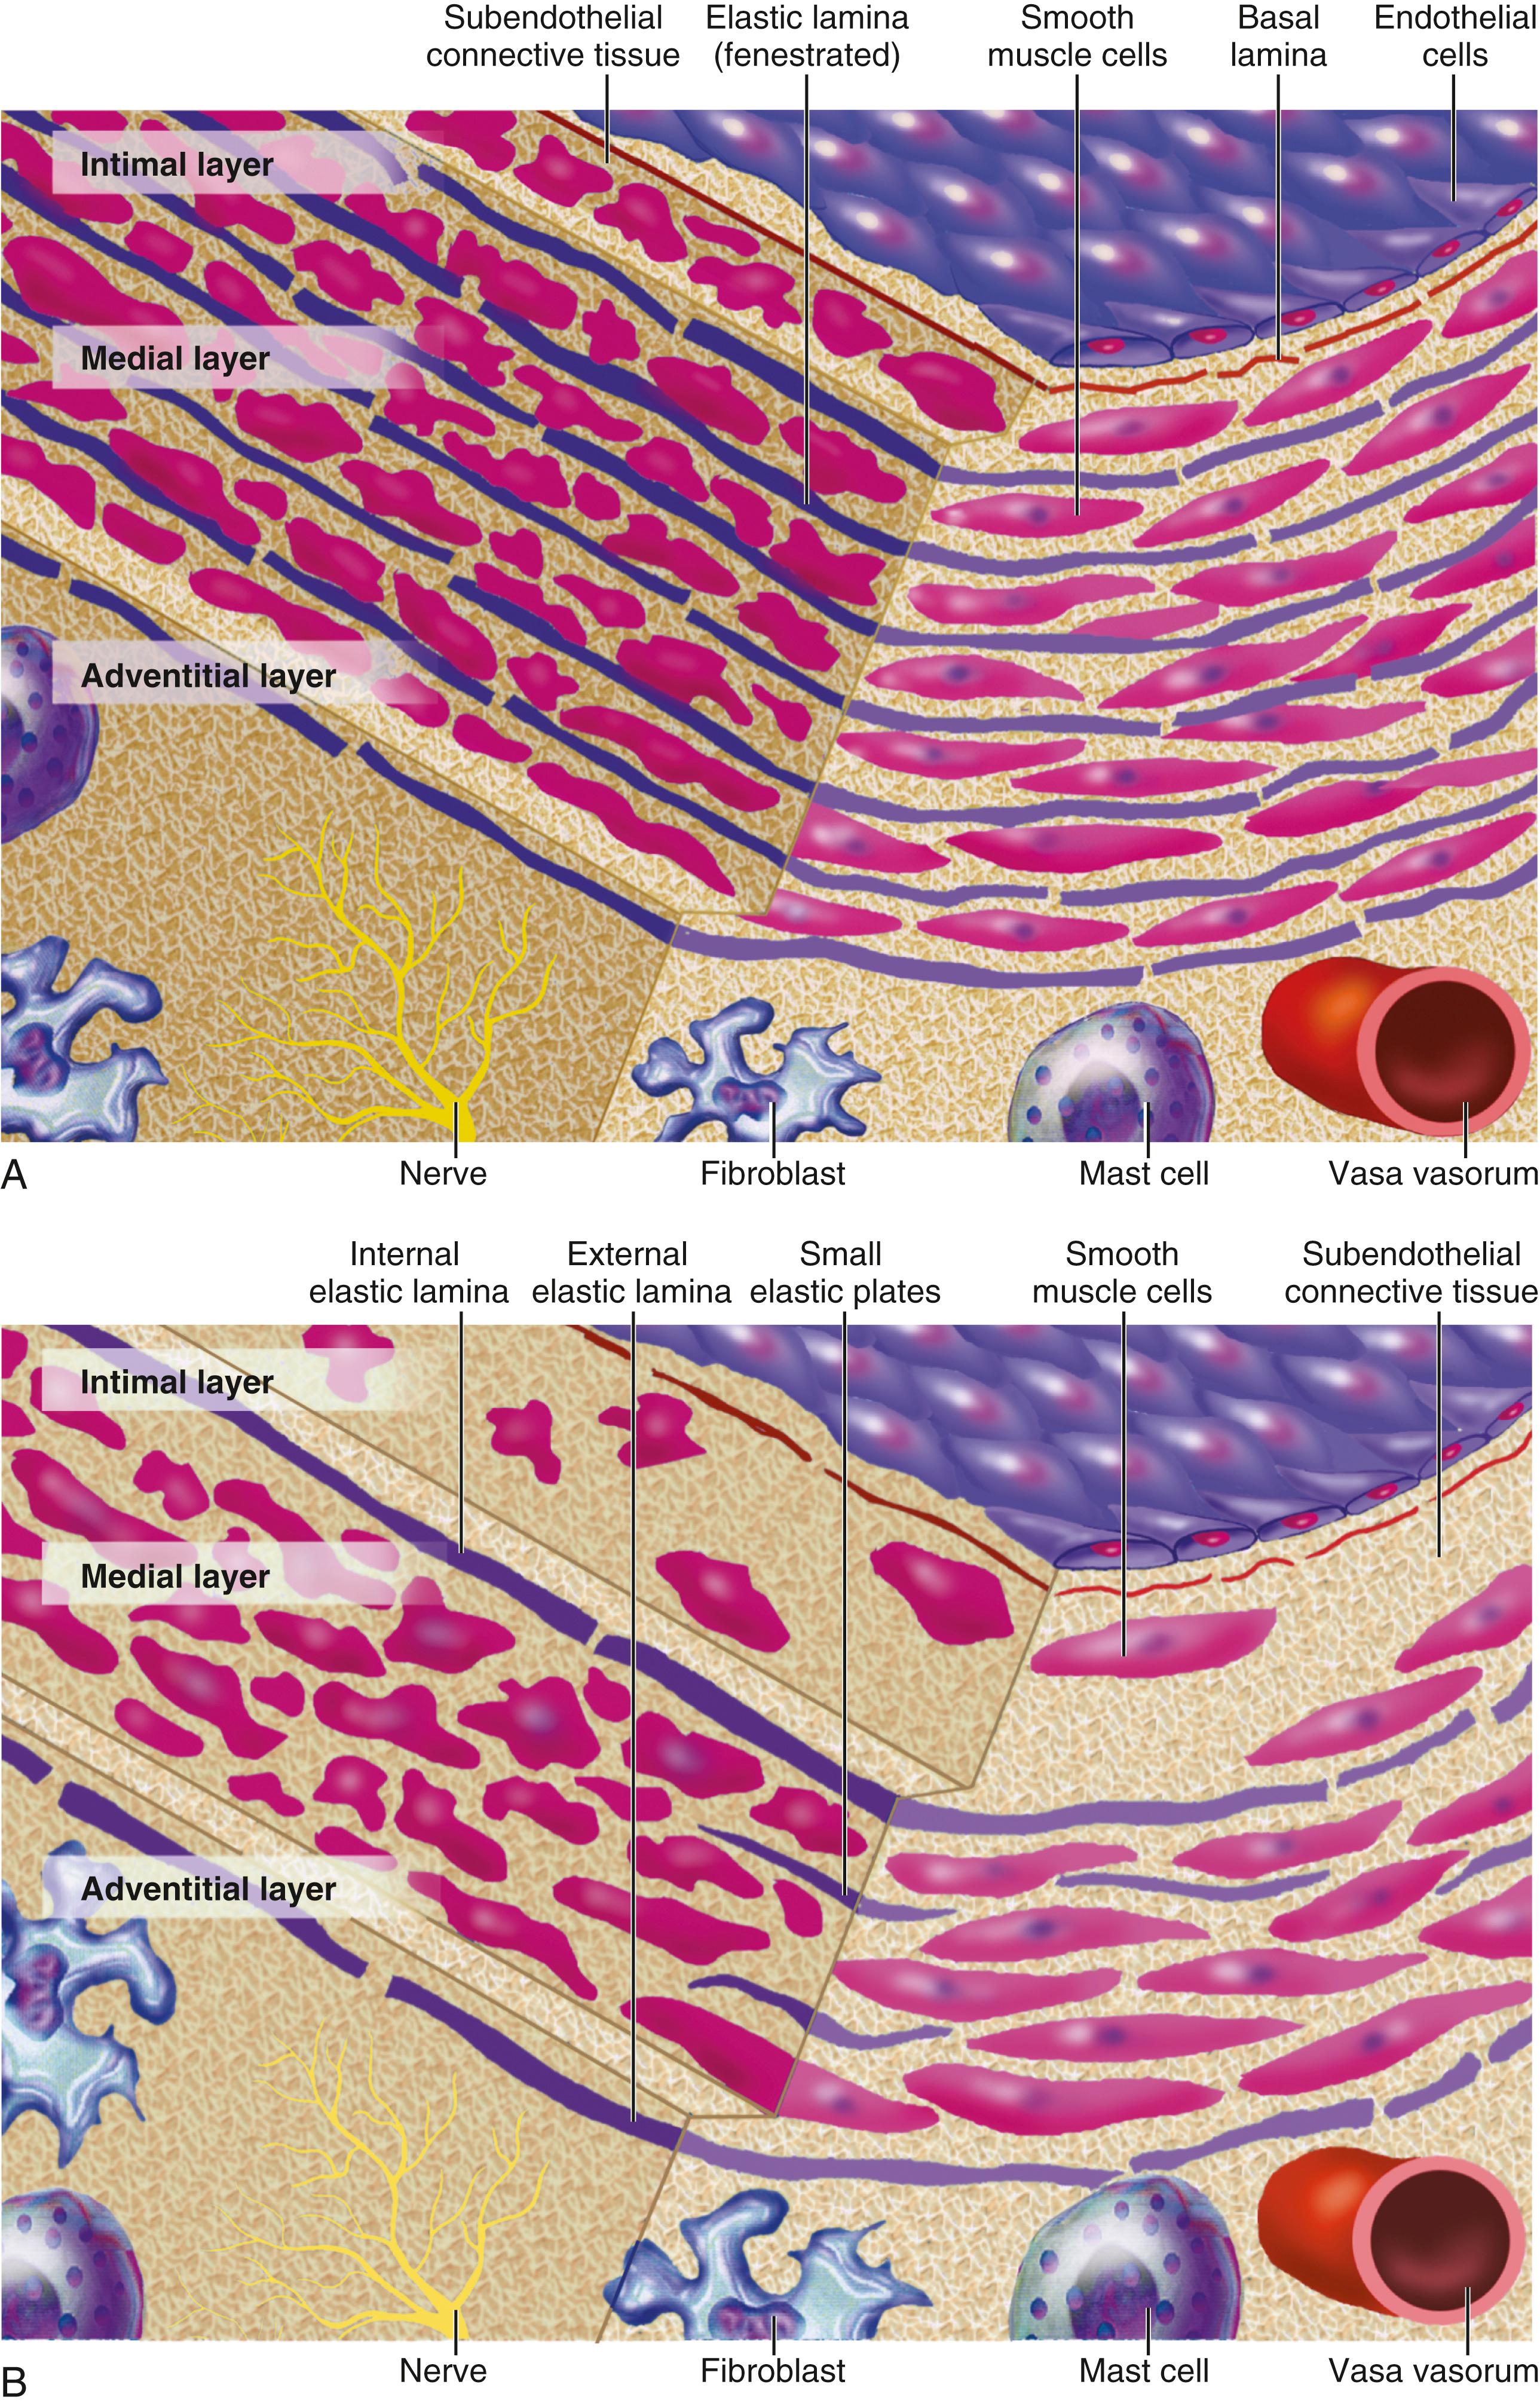 FIGURE 24.4, The structures of normal arteries. A, Elastic artery. Note the concentric laminae of elastic tissue that form sandwiches with successive layers of smooth muscle cells (SMCs). Each level of the elastic arterial tree has a characteristic number of elastic laminae. B, Muscular artery. In the muscular artery, a collagenous matrix surrounds the SMCs, but the architecture lacks the concentric rings of the well-organized elastic tissue characteristic of larger arteries.